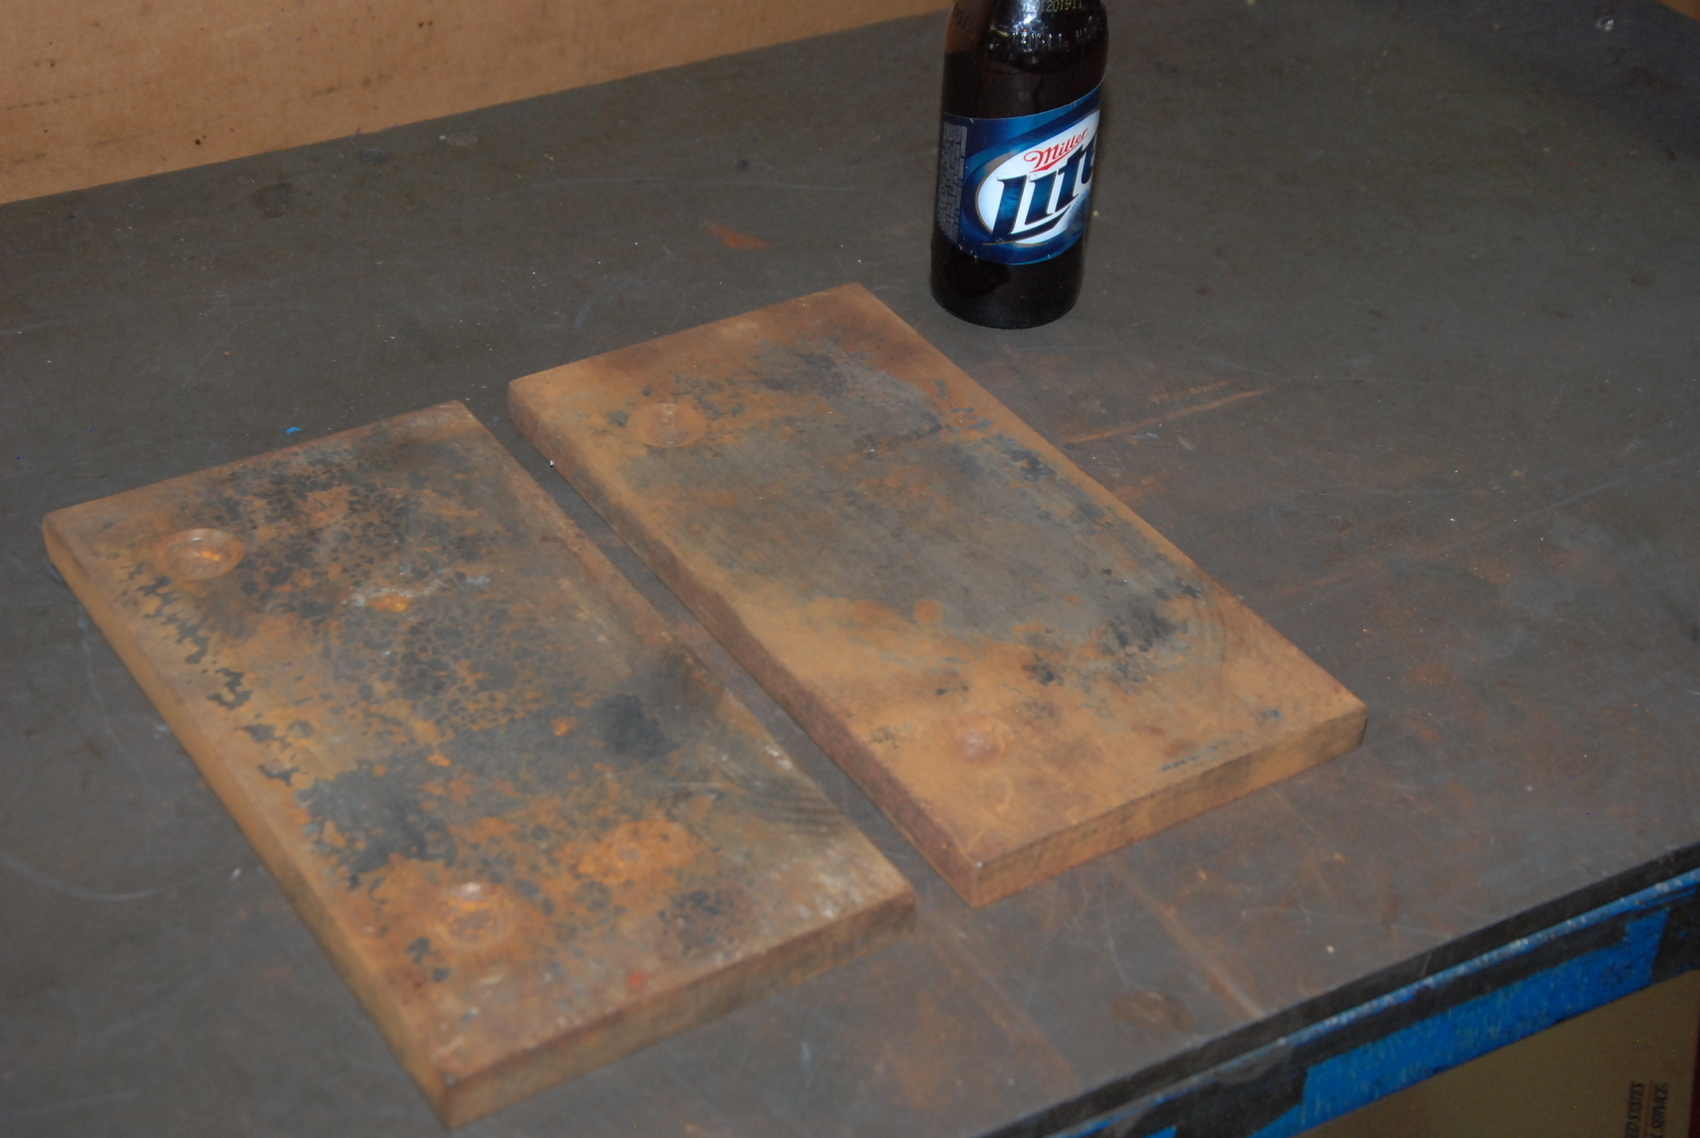 Lot of 2 steel Plate for blacksmith anvil,39 lbs;11-7/8x6x3/4"